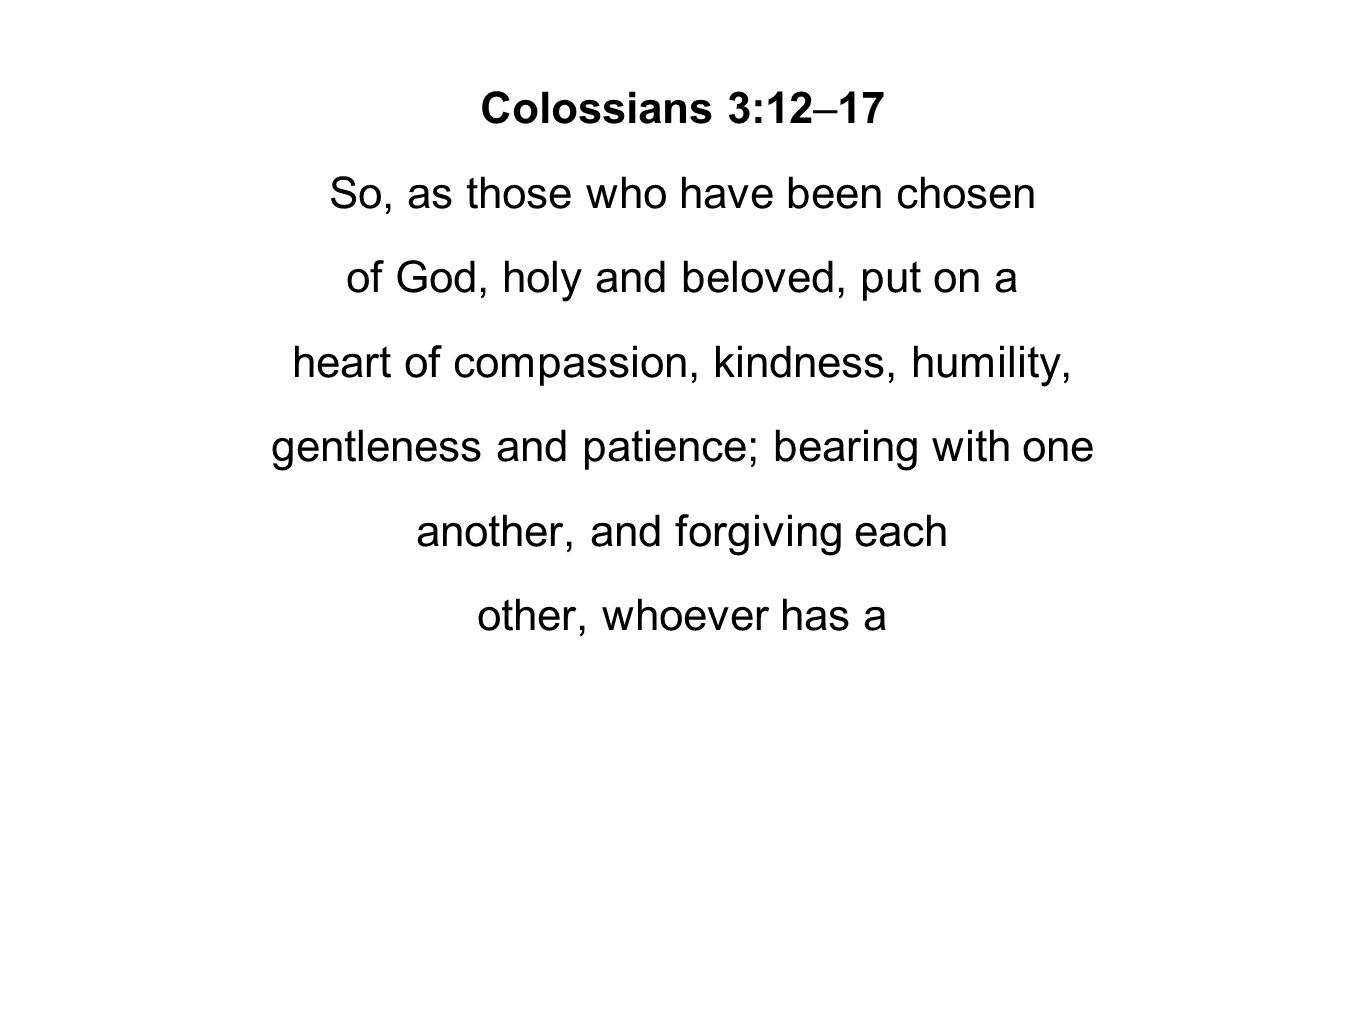 Colossians 3:12–17 So, as those who have been chosen of God, holy and beloved, put on a heart of compassion, kindness, humility, gentleness and patience; bearing with one another, and forgiving each other, whoever has a